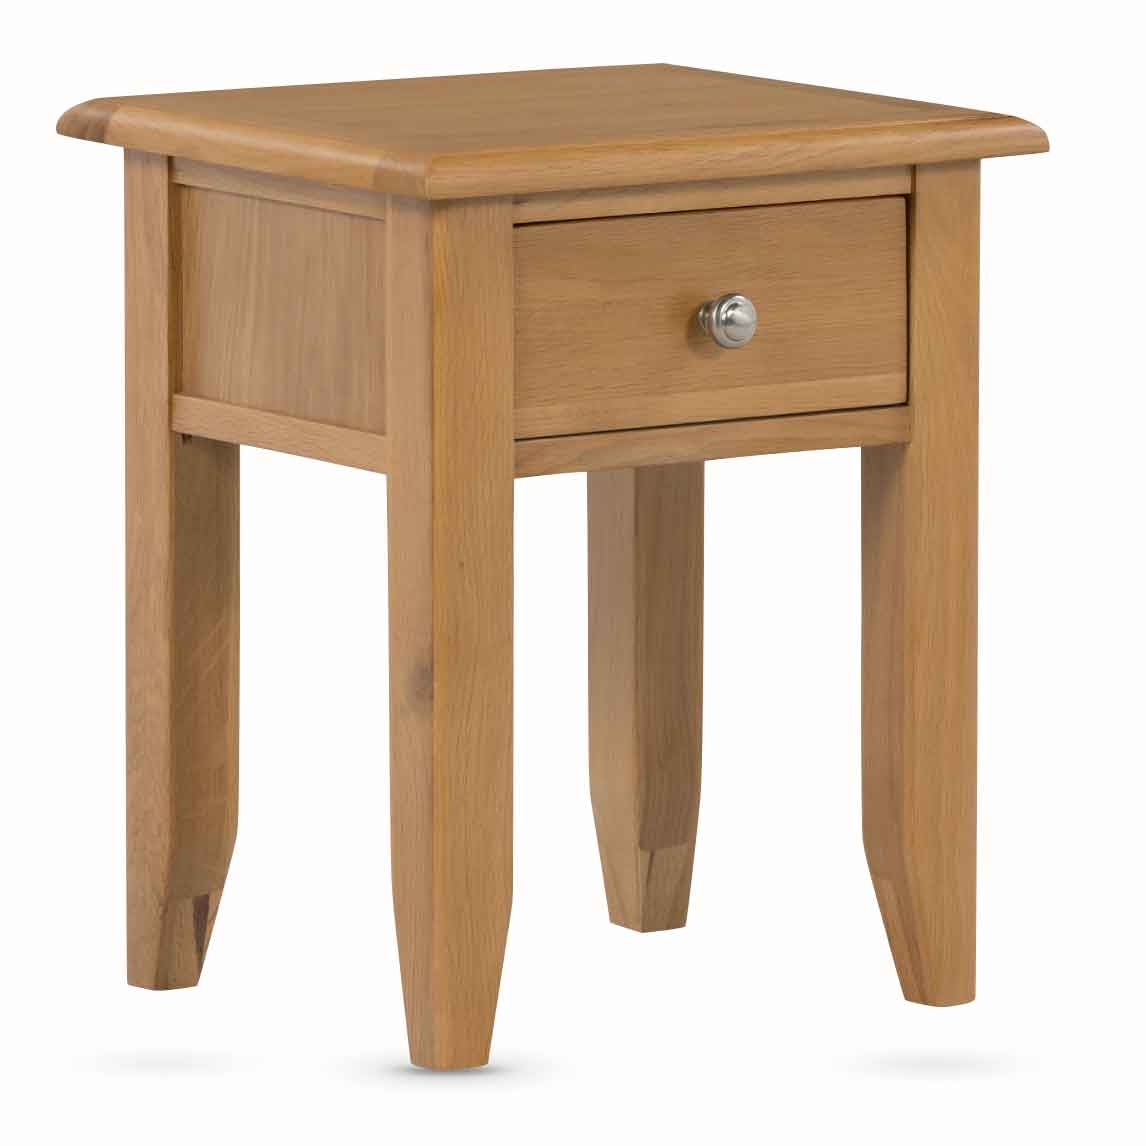 Manor Collection Kilkenny Oak Lamp Table